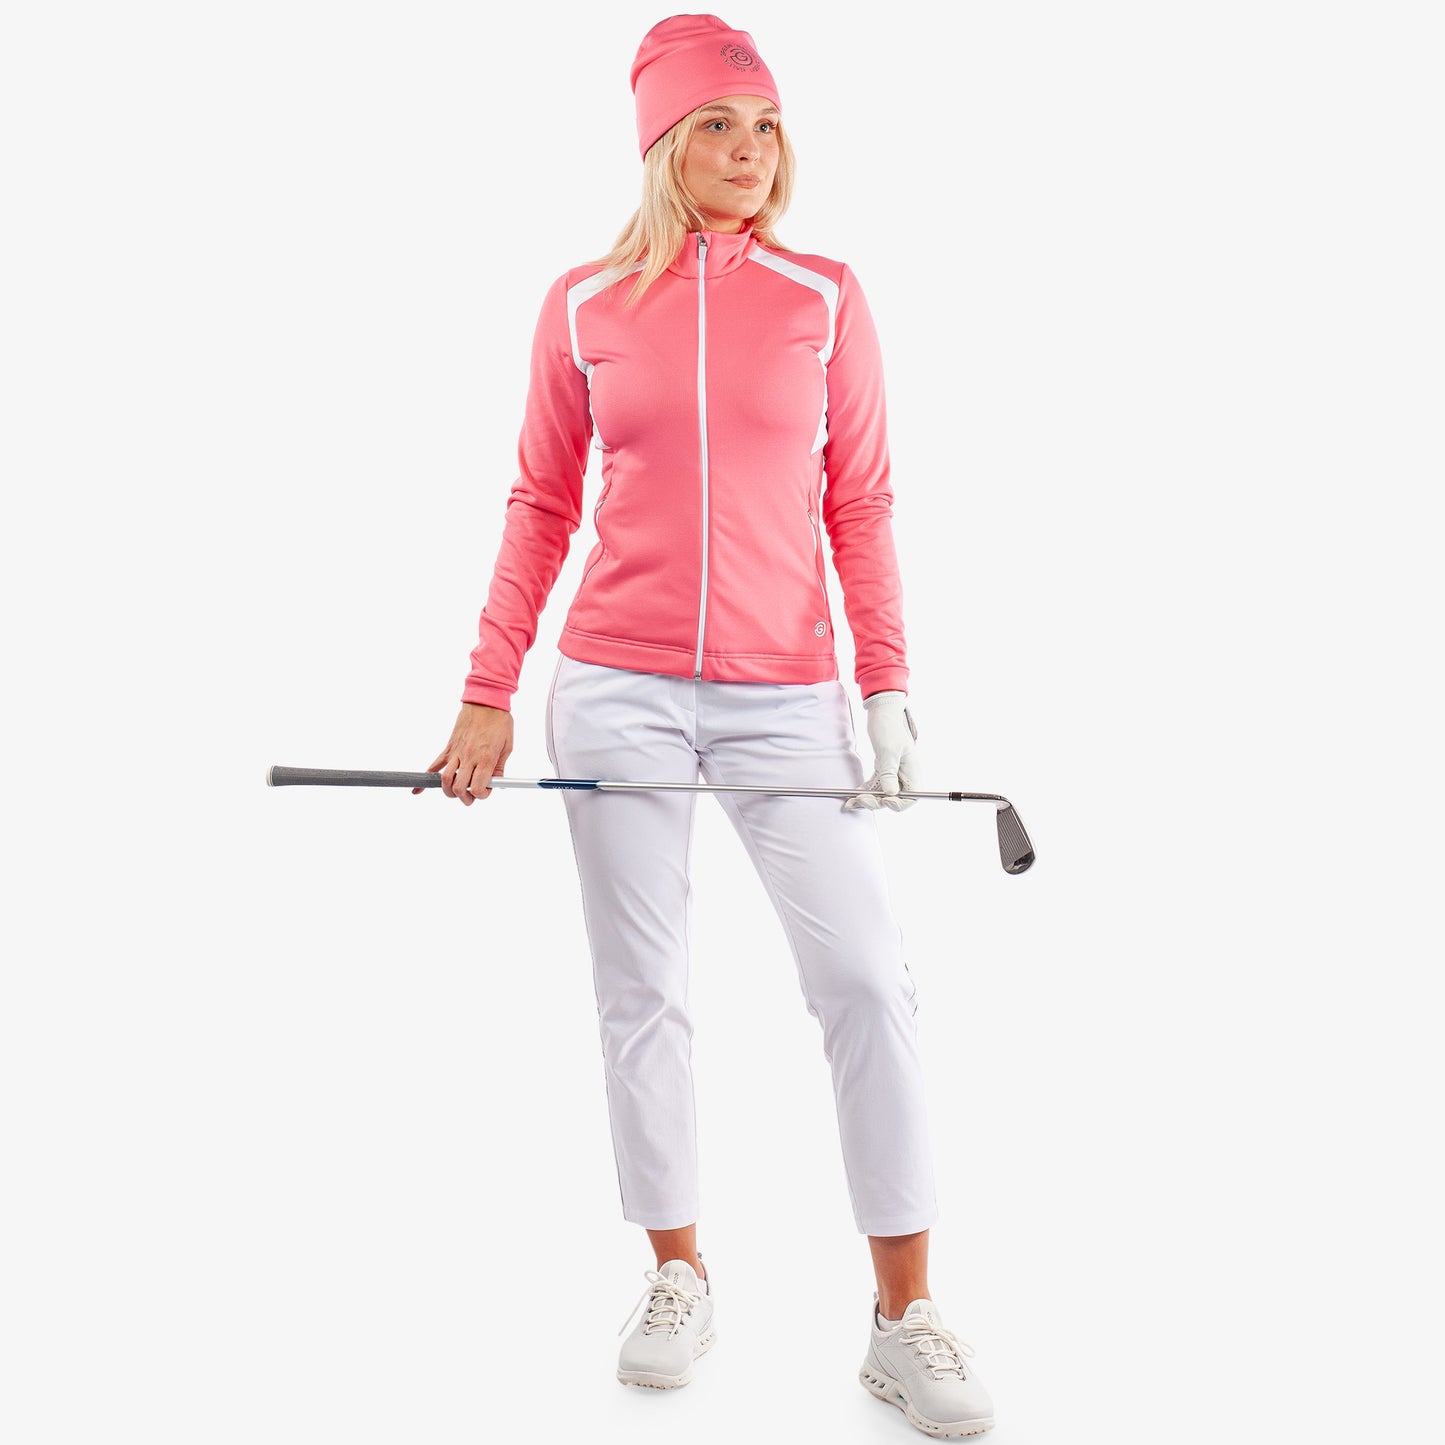 Galvin Green Ladies INSULA Jacket with Shaped Contrast Panels in Camelia Rose & White